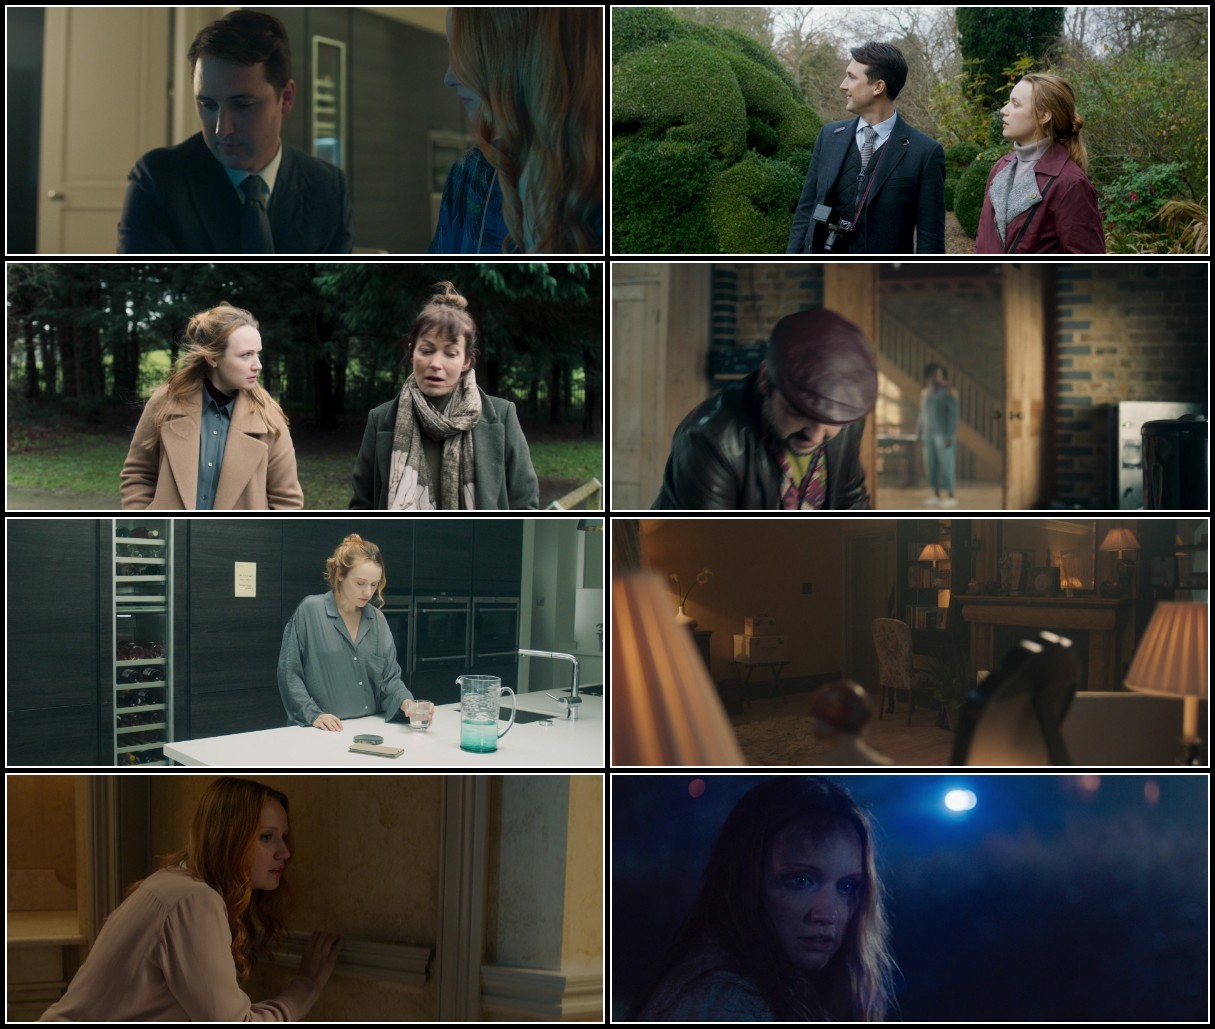 The Stranger in Our Bed (2022) 1080p BluRay x264-GUACAMOLE DP9uszVD_o